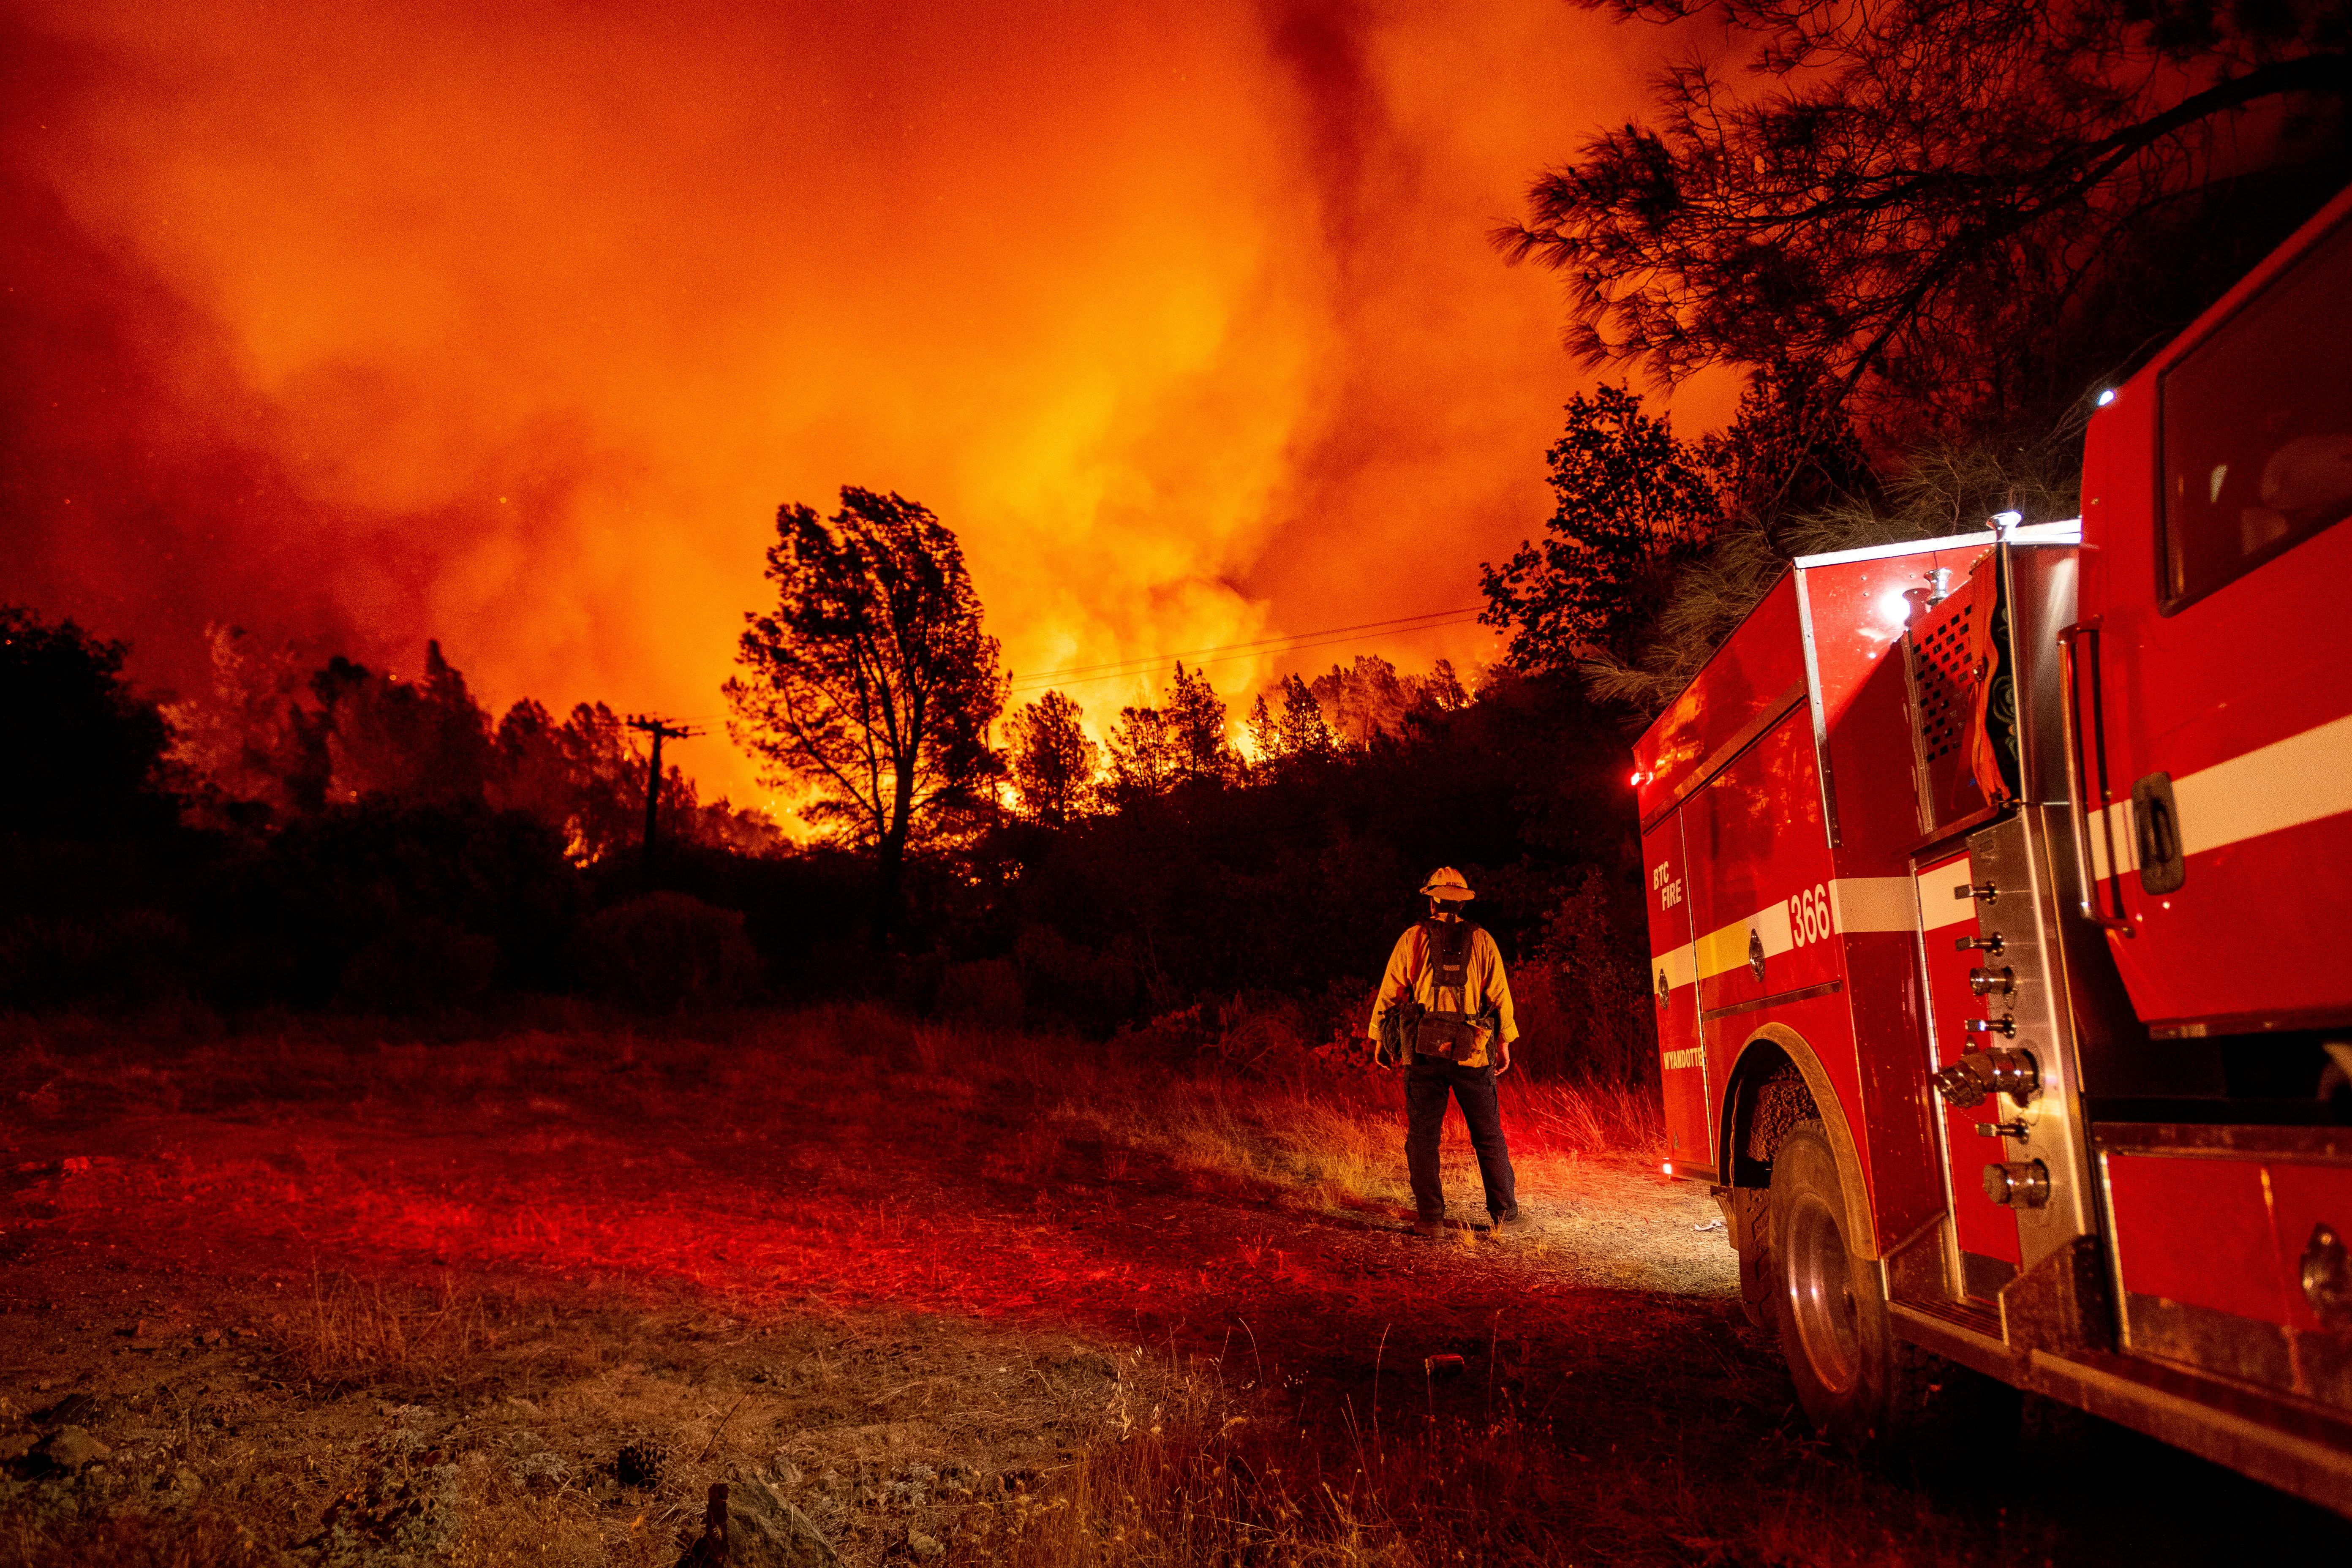 A firefighter watching the approaching blaze in Oroville, California after hundreds of people were evacuated from the area